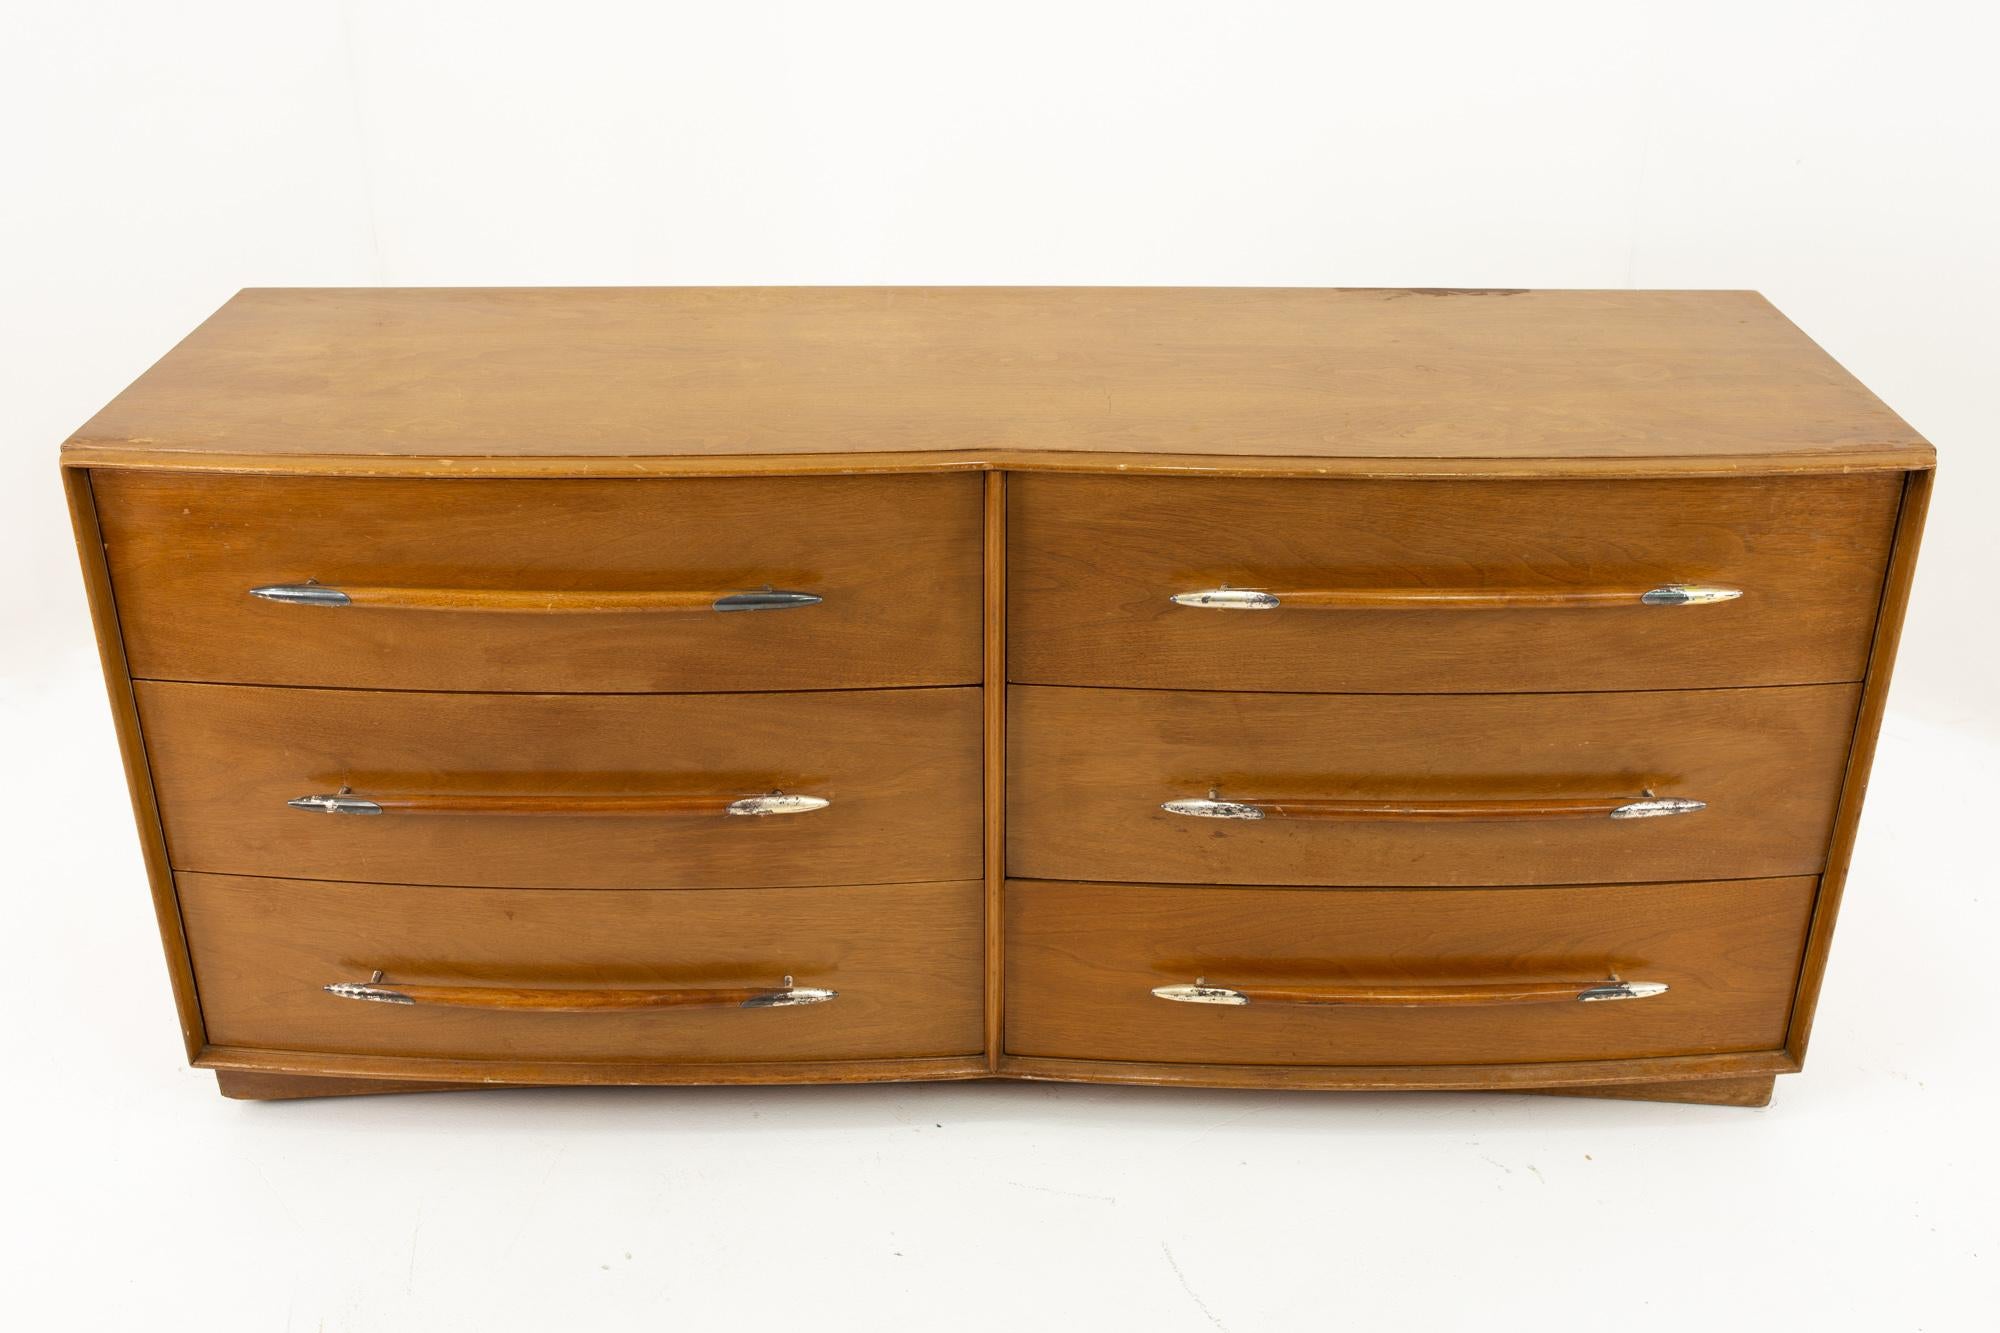 TH Robsjohn Gibbings for Widdicomb Mid Century 6 Drawer Lowboy Dresser

Dresser measures: 67.5 wide x 21.5 deep x 30 high

This price includes getting this piece in what we call Restored Vintage Condition. That means the piece is permanently fixed